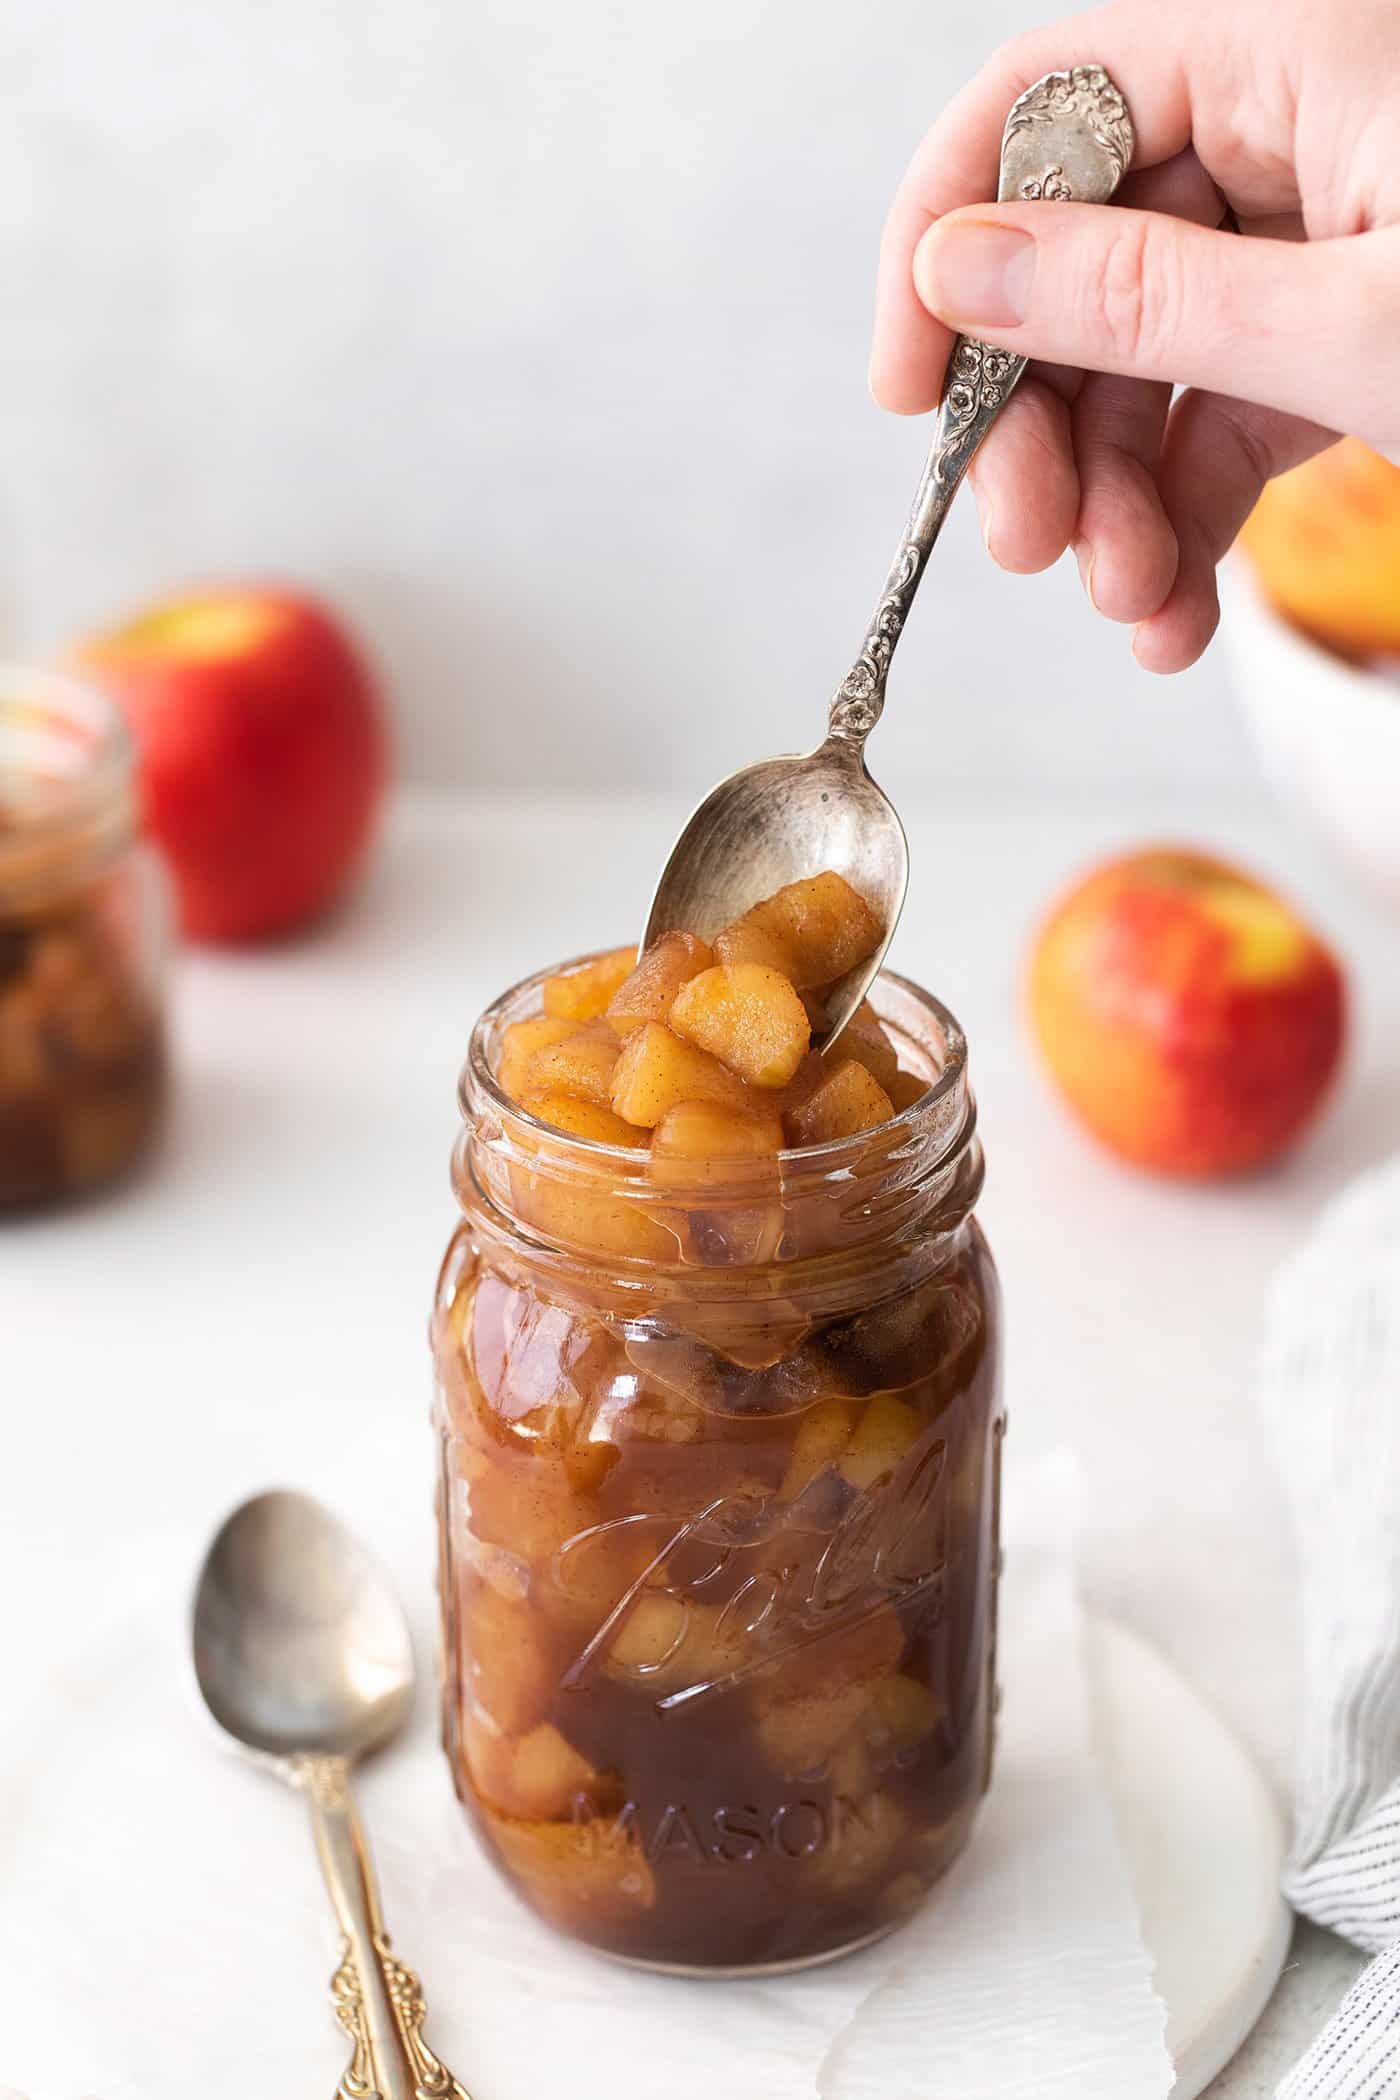 a spoon dipping into a jar of homemade applesauce